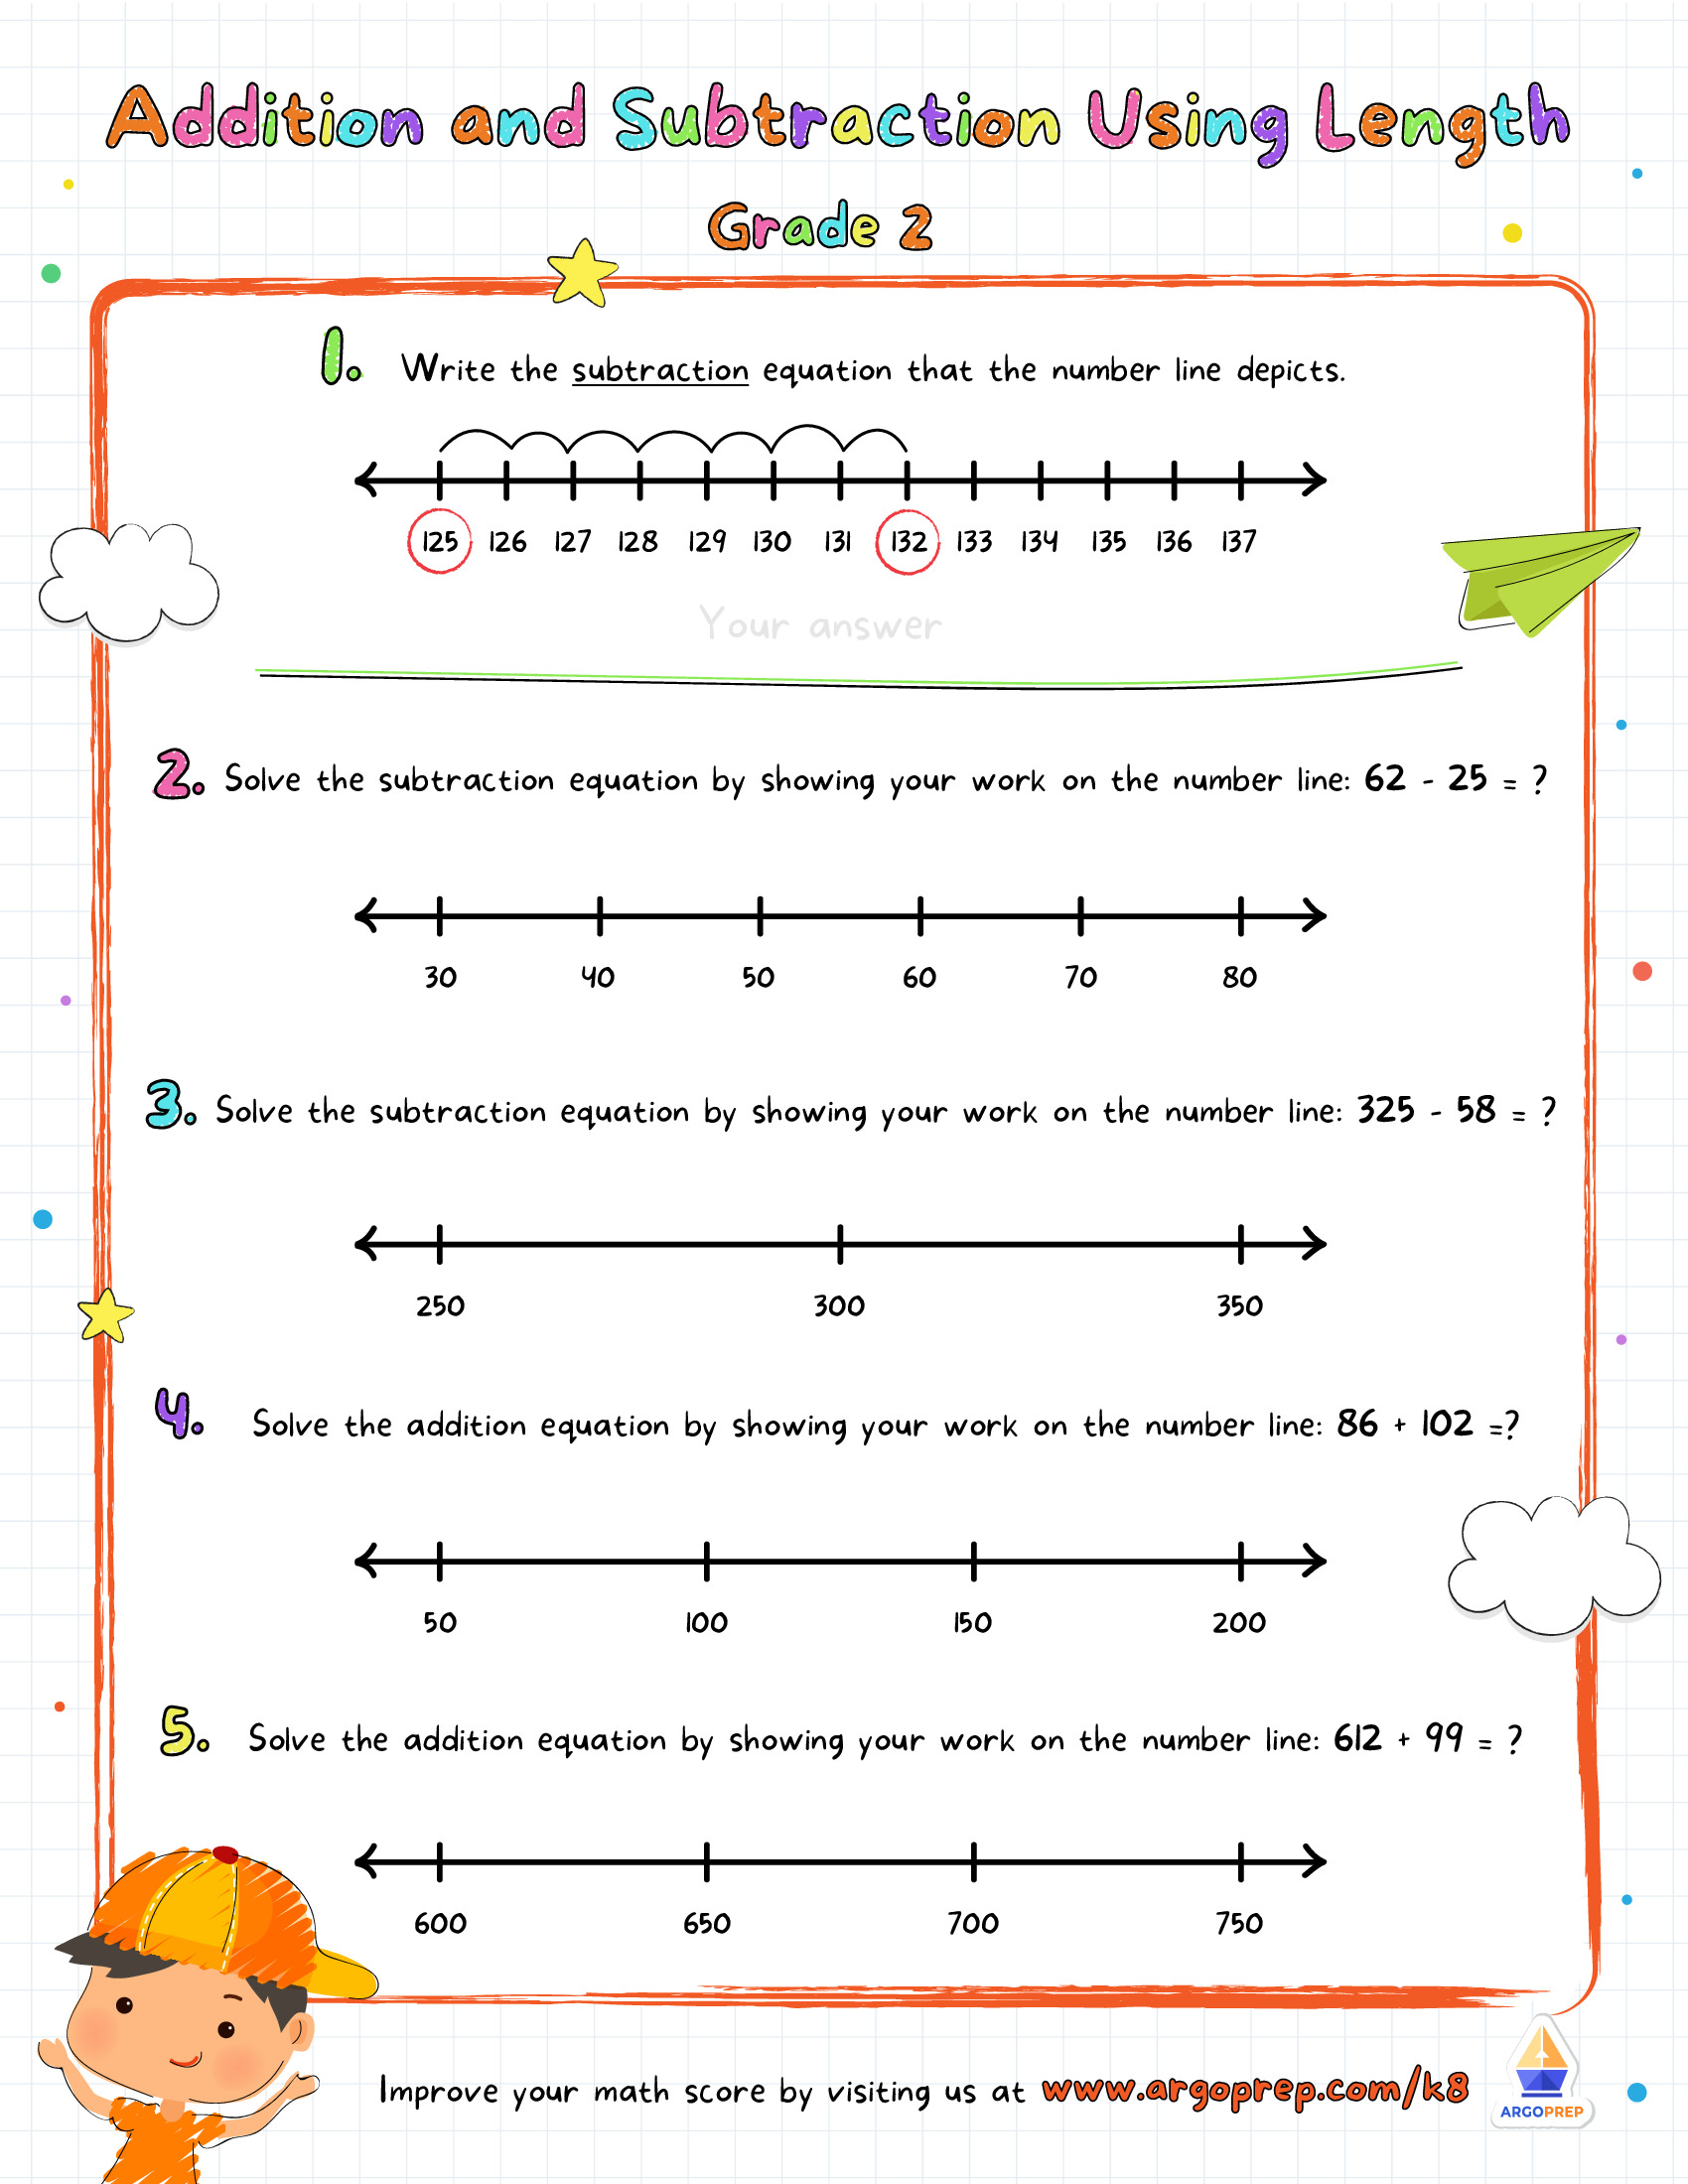 adding-and-subtracting-using-a-number-line-argoprep